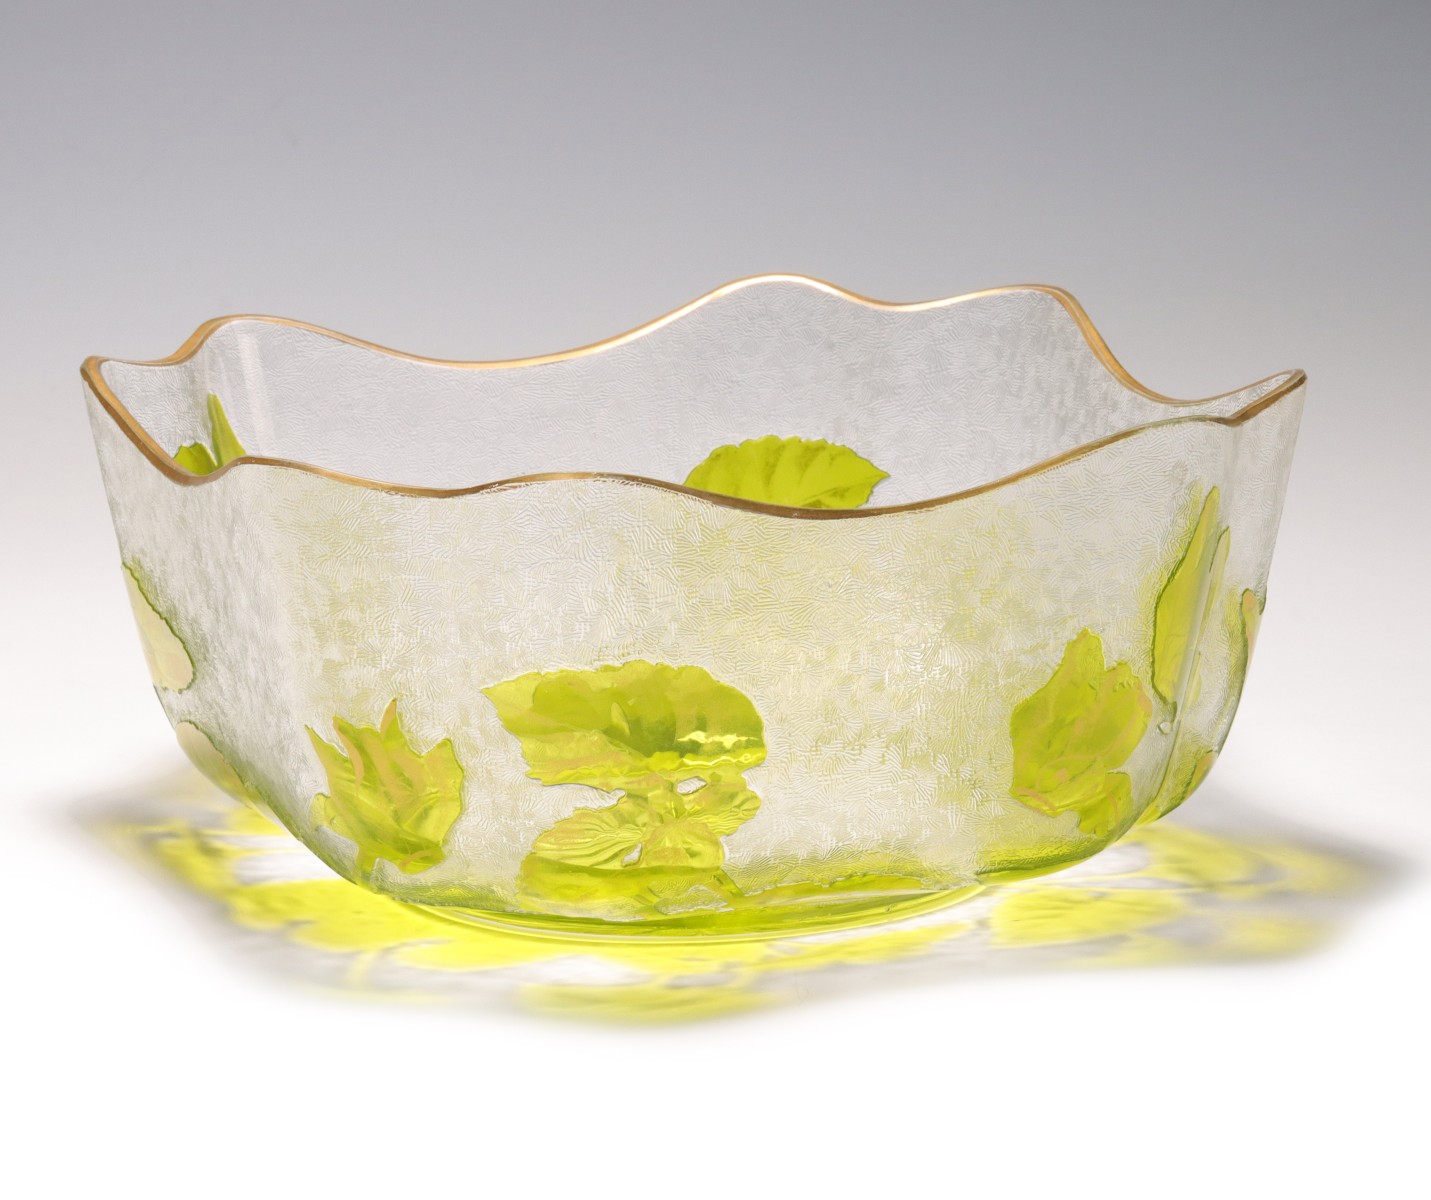 A FRENCH CAMEO GLASS BOWL ATTRIBUTED TO BACCARAT